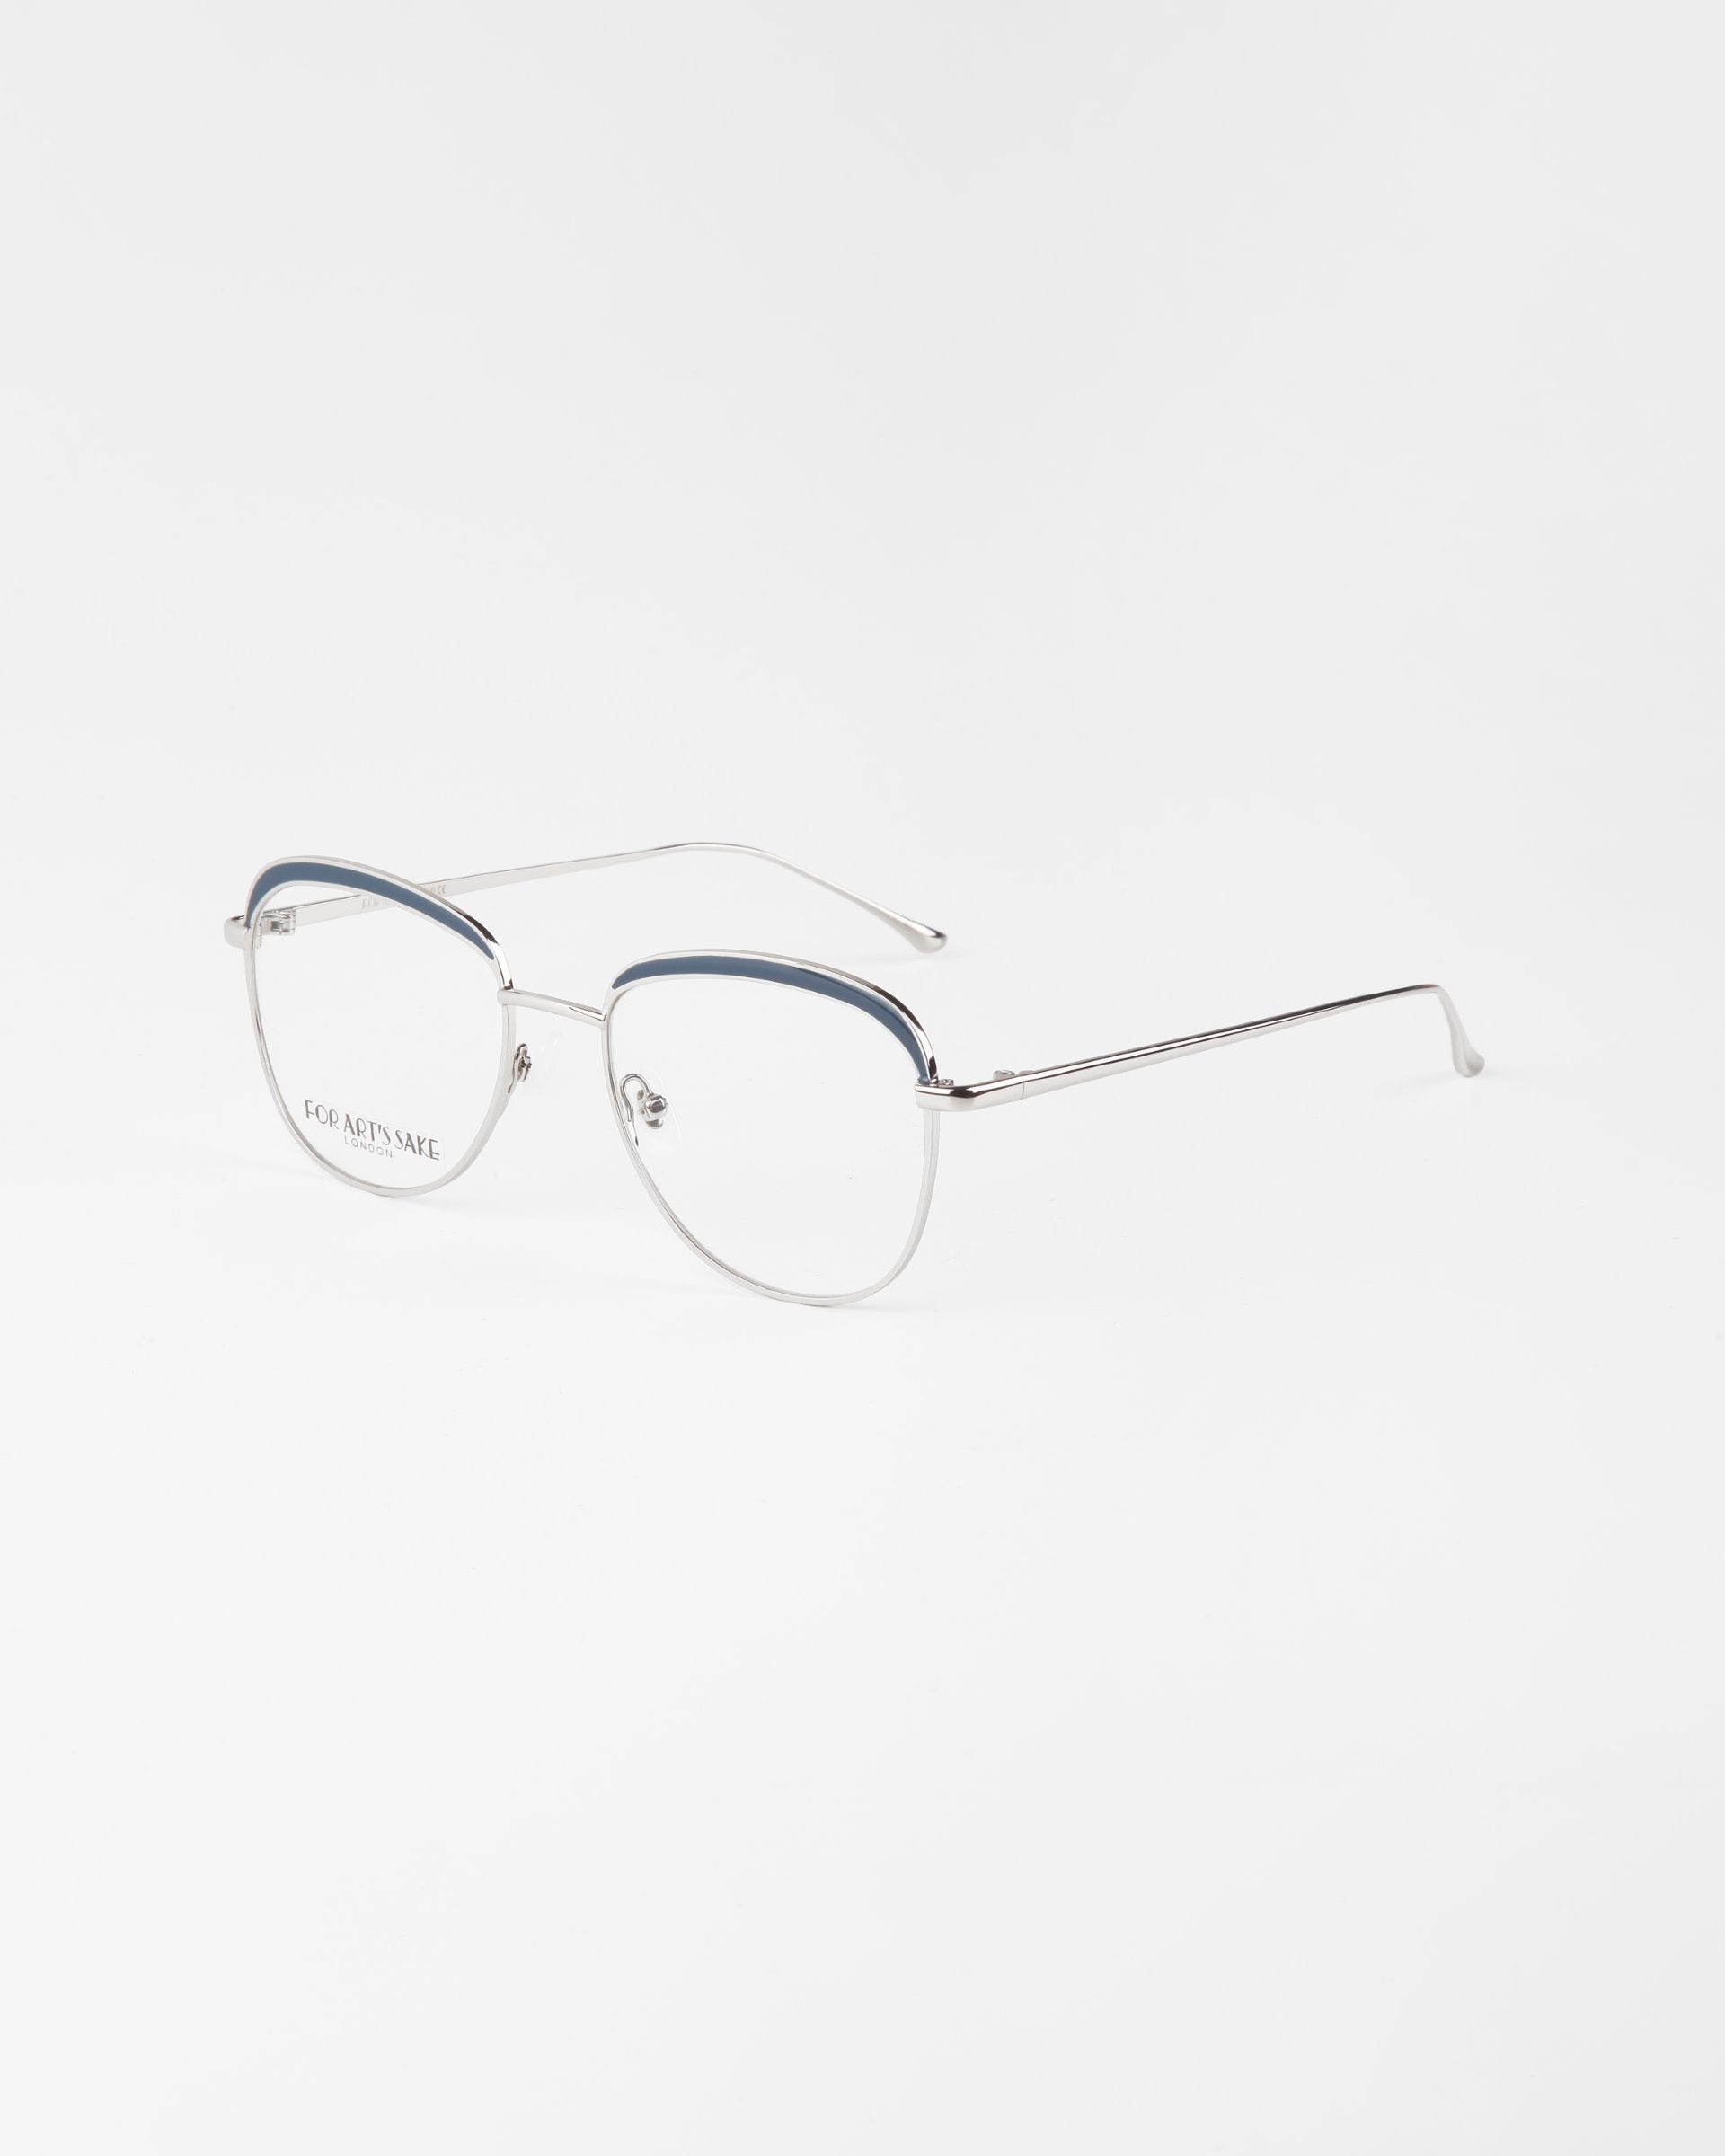 A pair of stylish, metal-rimmed eyeglasses called Smoothie from For Art&#39;s Sake® with a thin, silver frame and transparent lenses. The upper part of the rims is accented with a blue detail and includes a blue light filter. The glasses are positioned at an angle on a white surface.